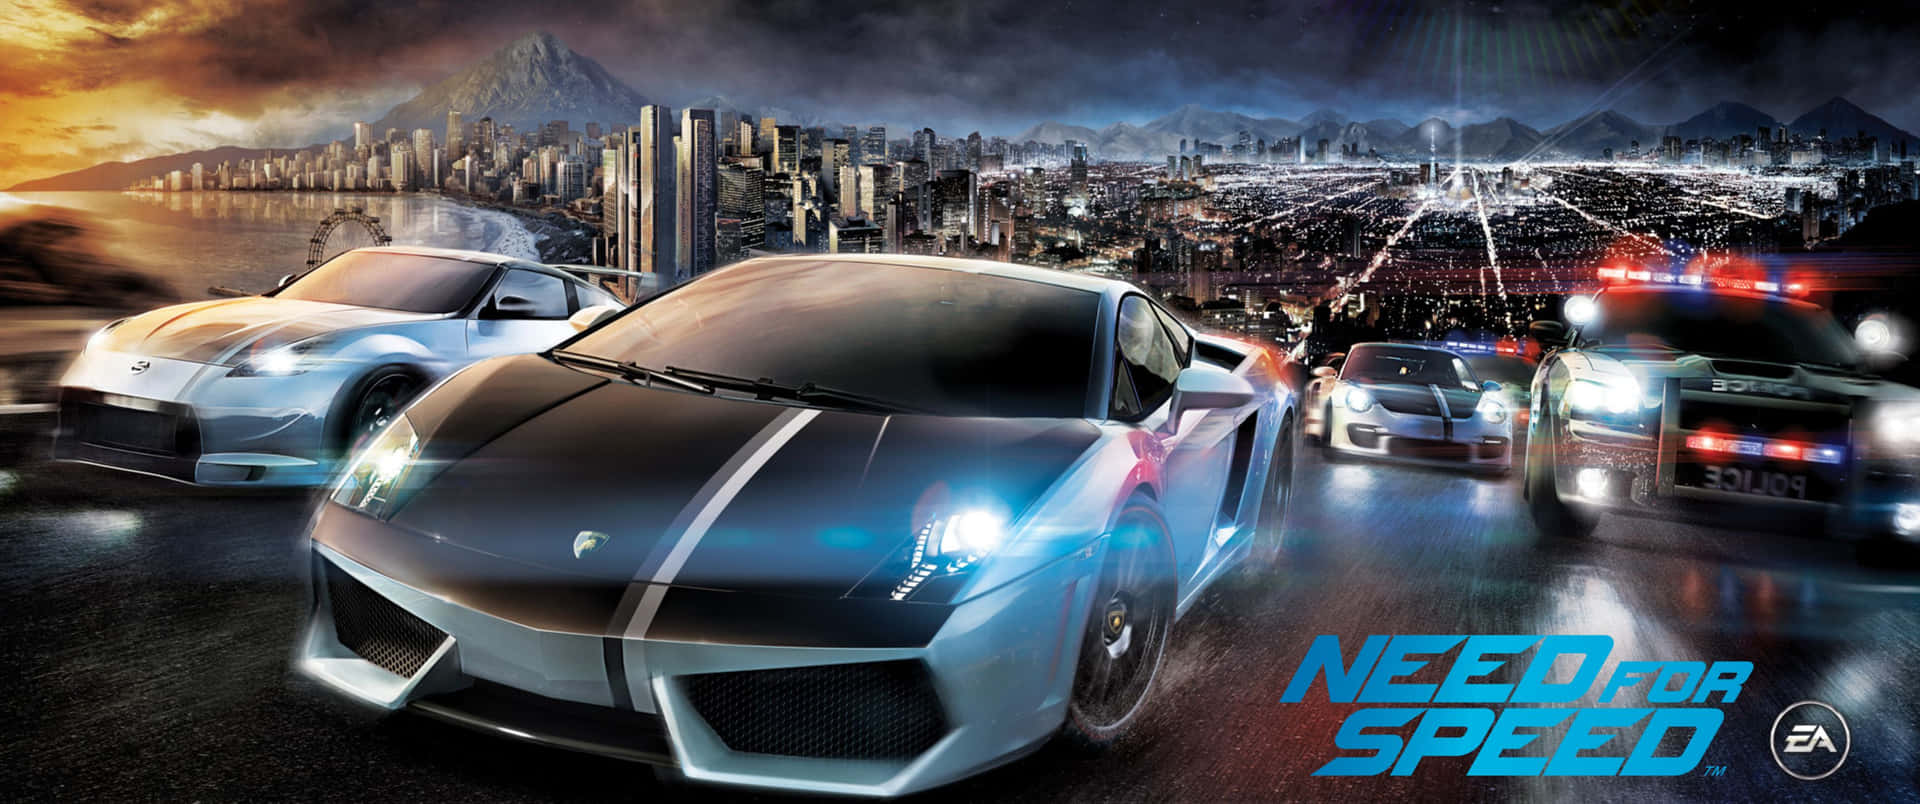 Image  Take The Road By Storm in this 3440x1440p Need For Speed Wallpaper